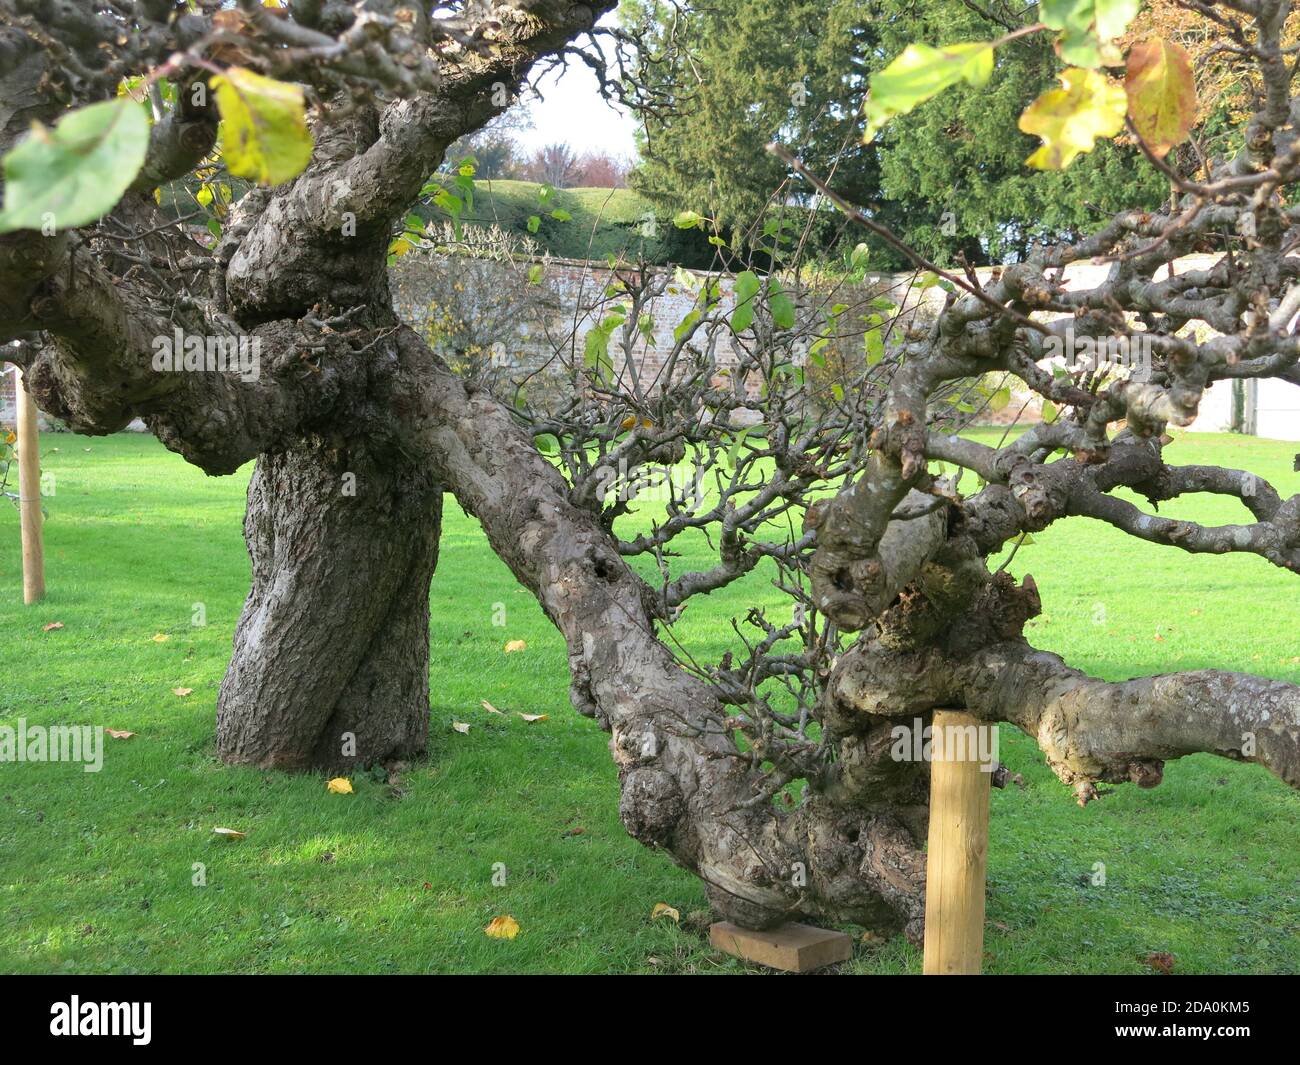 A gnarled, old, espaliered fruit tree held up on wooden props in the walled garden at Rousham House, Oxfordshire. Stock Photo